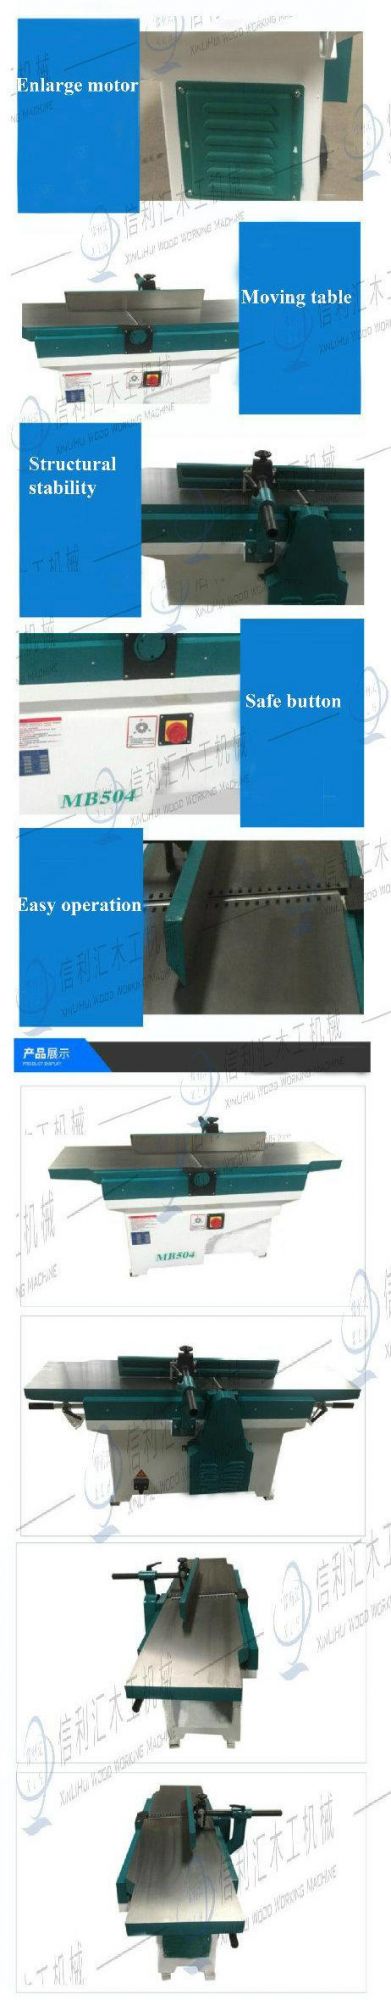 300mm Woodworking Manual Surface Planer Cheap Price Factory Direct Supply / Woodworking Lathe, Jointer Planer